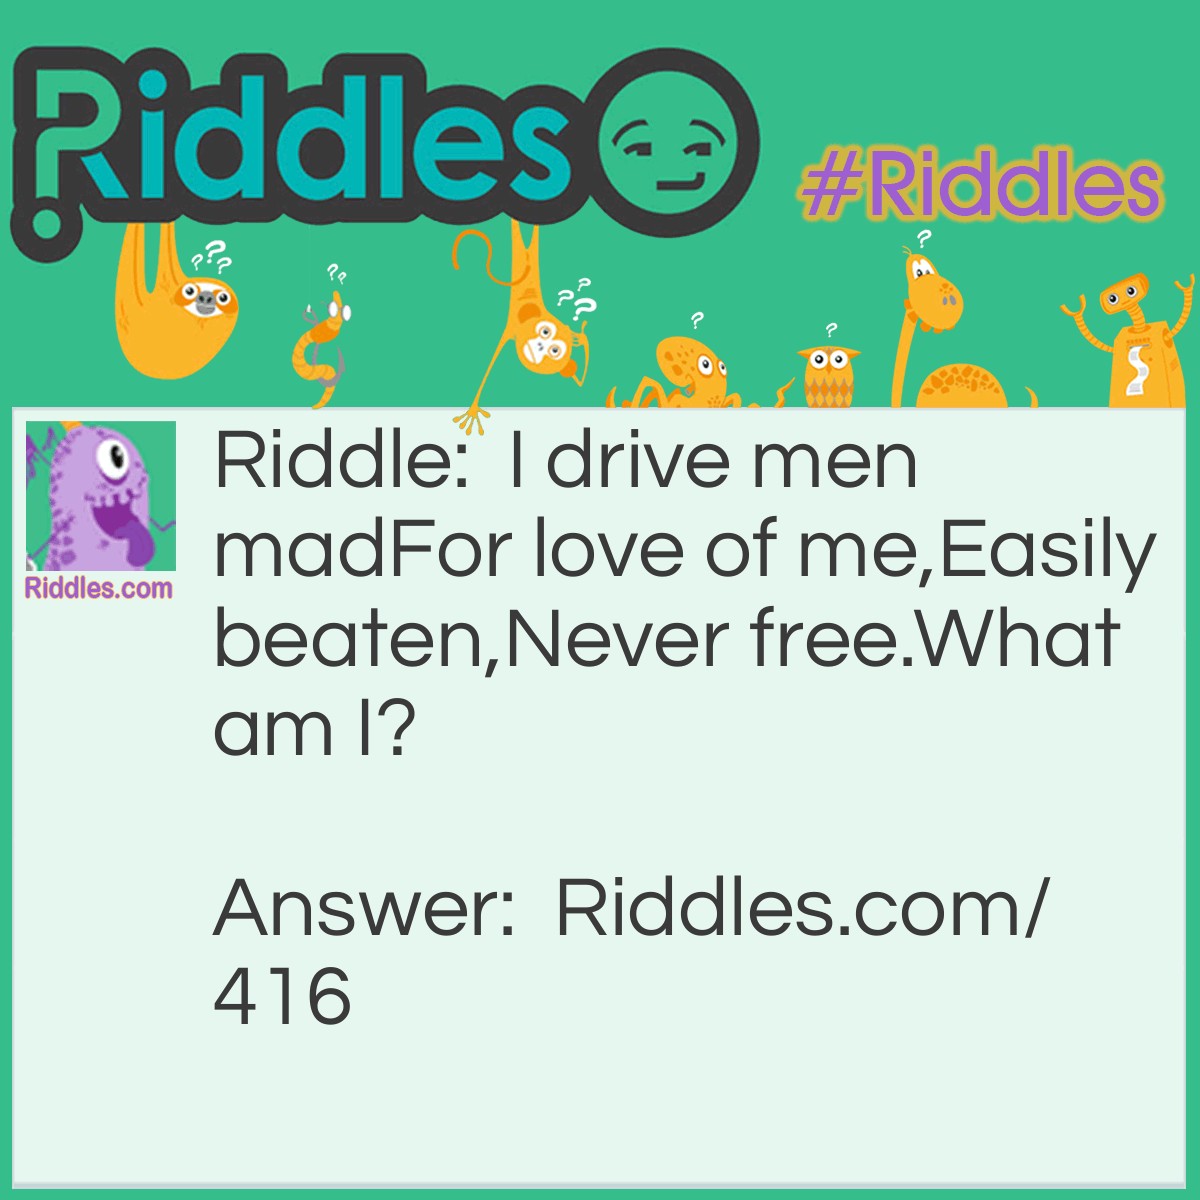 Riddle: I drive men mad For love of me, Easily beaten, Never free. What am I? Answer: GOLD.